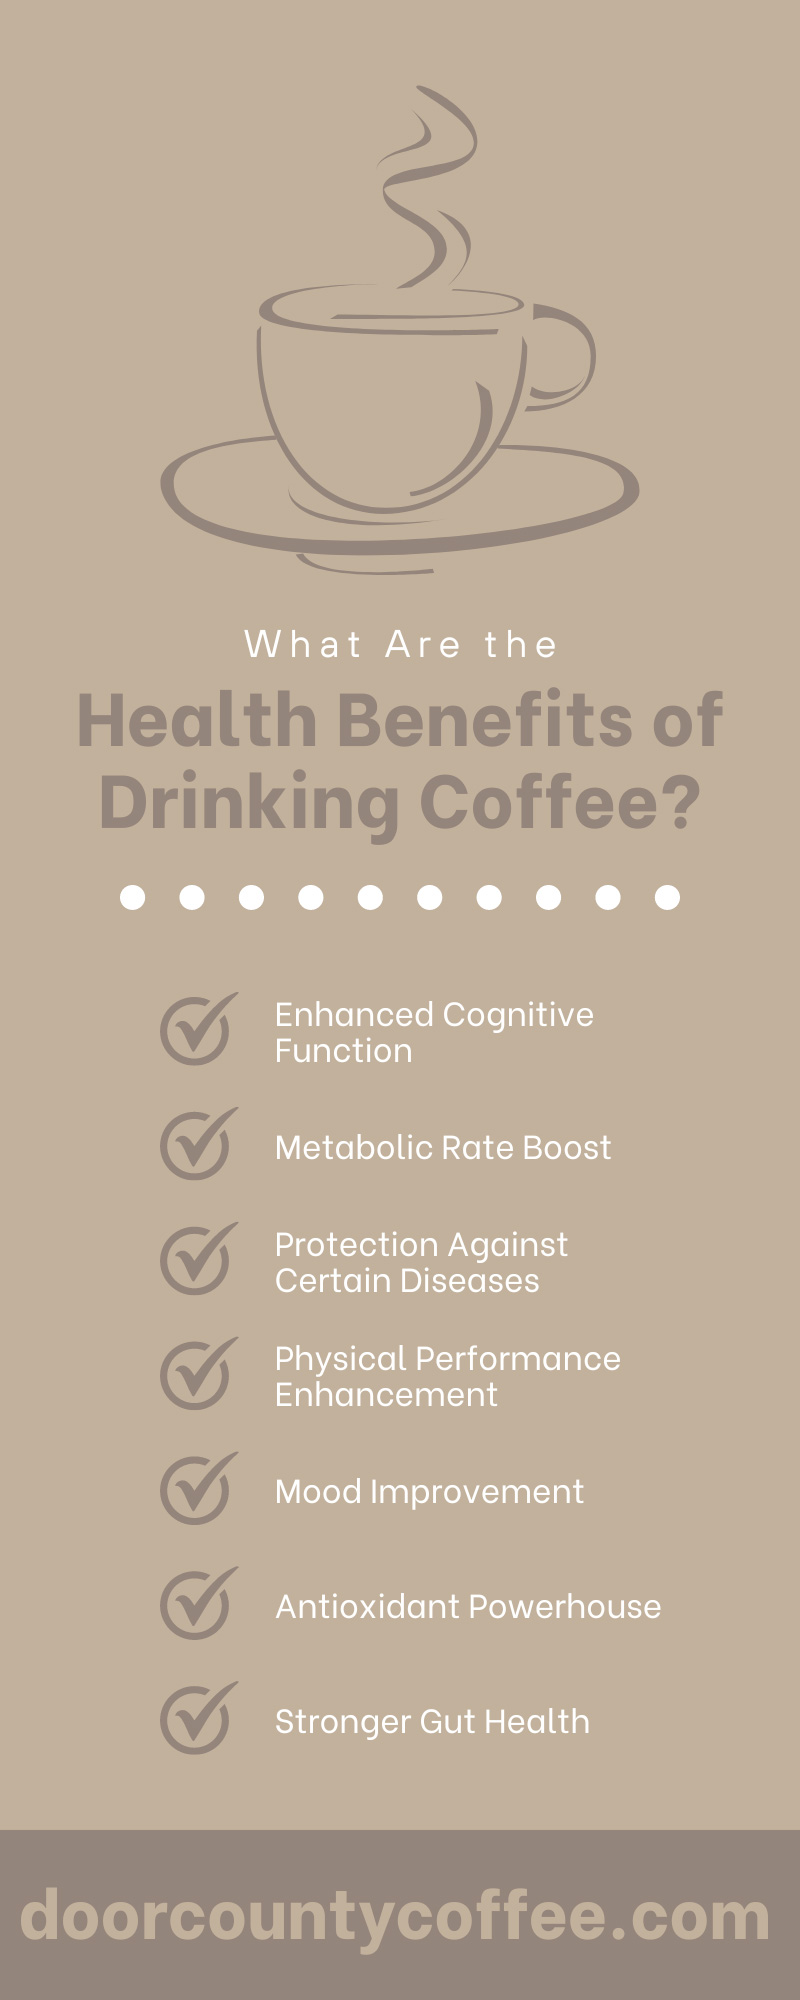 What Are the Health Benefits of Drinking Coffee?